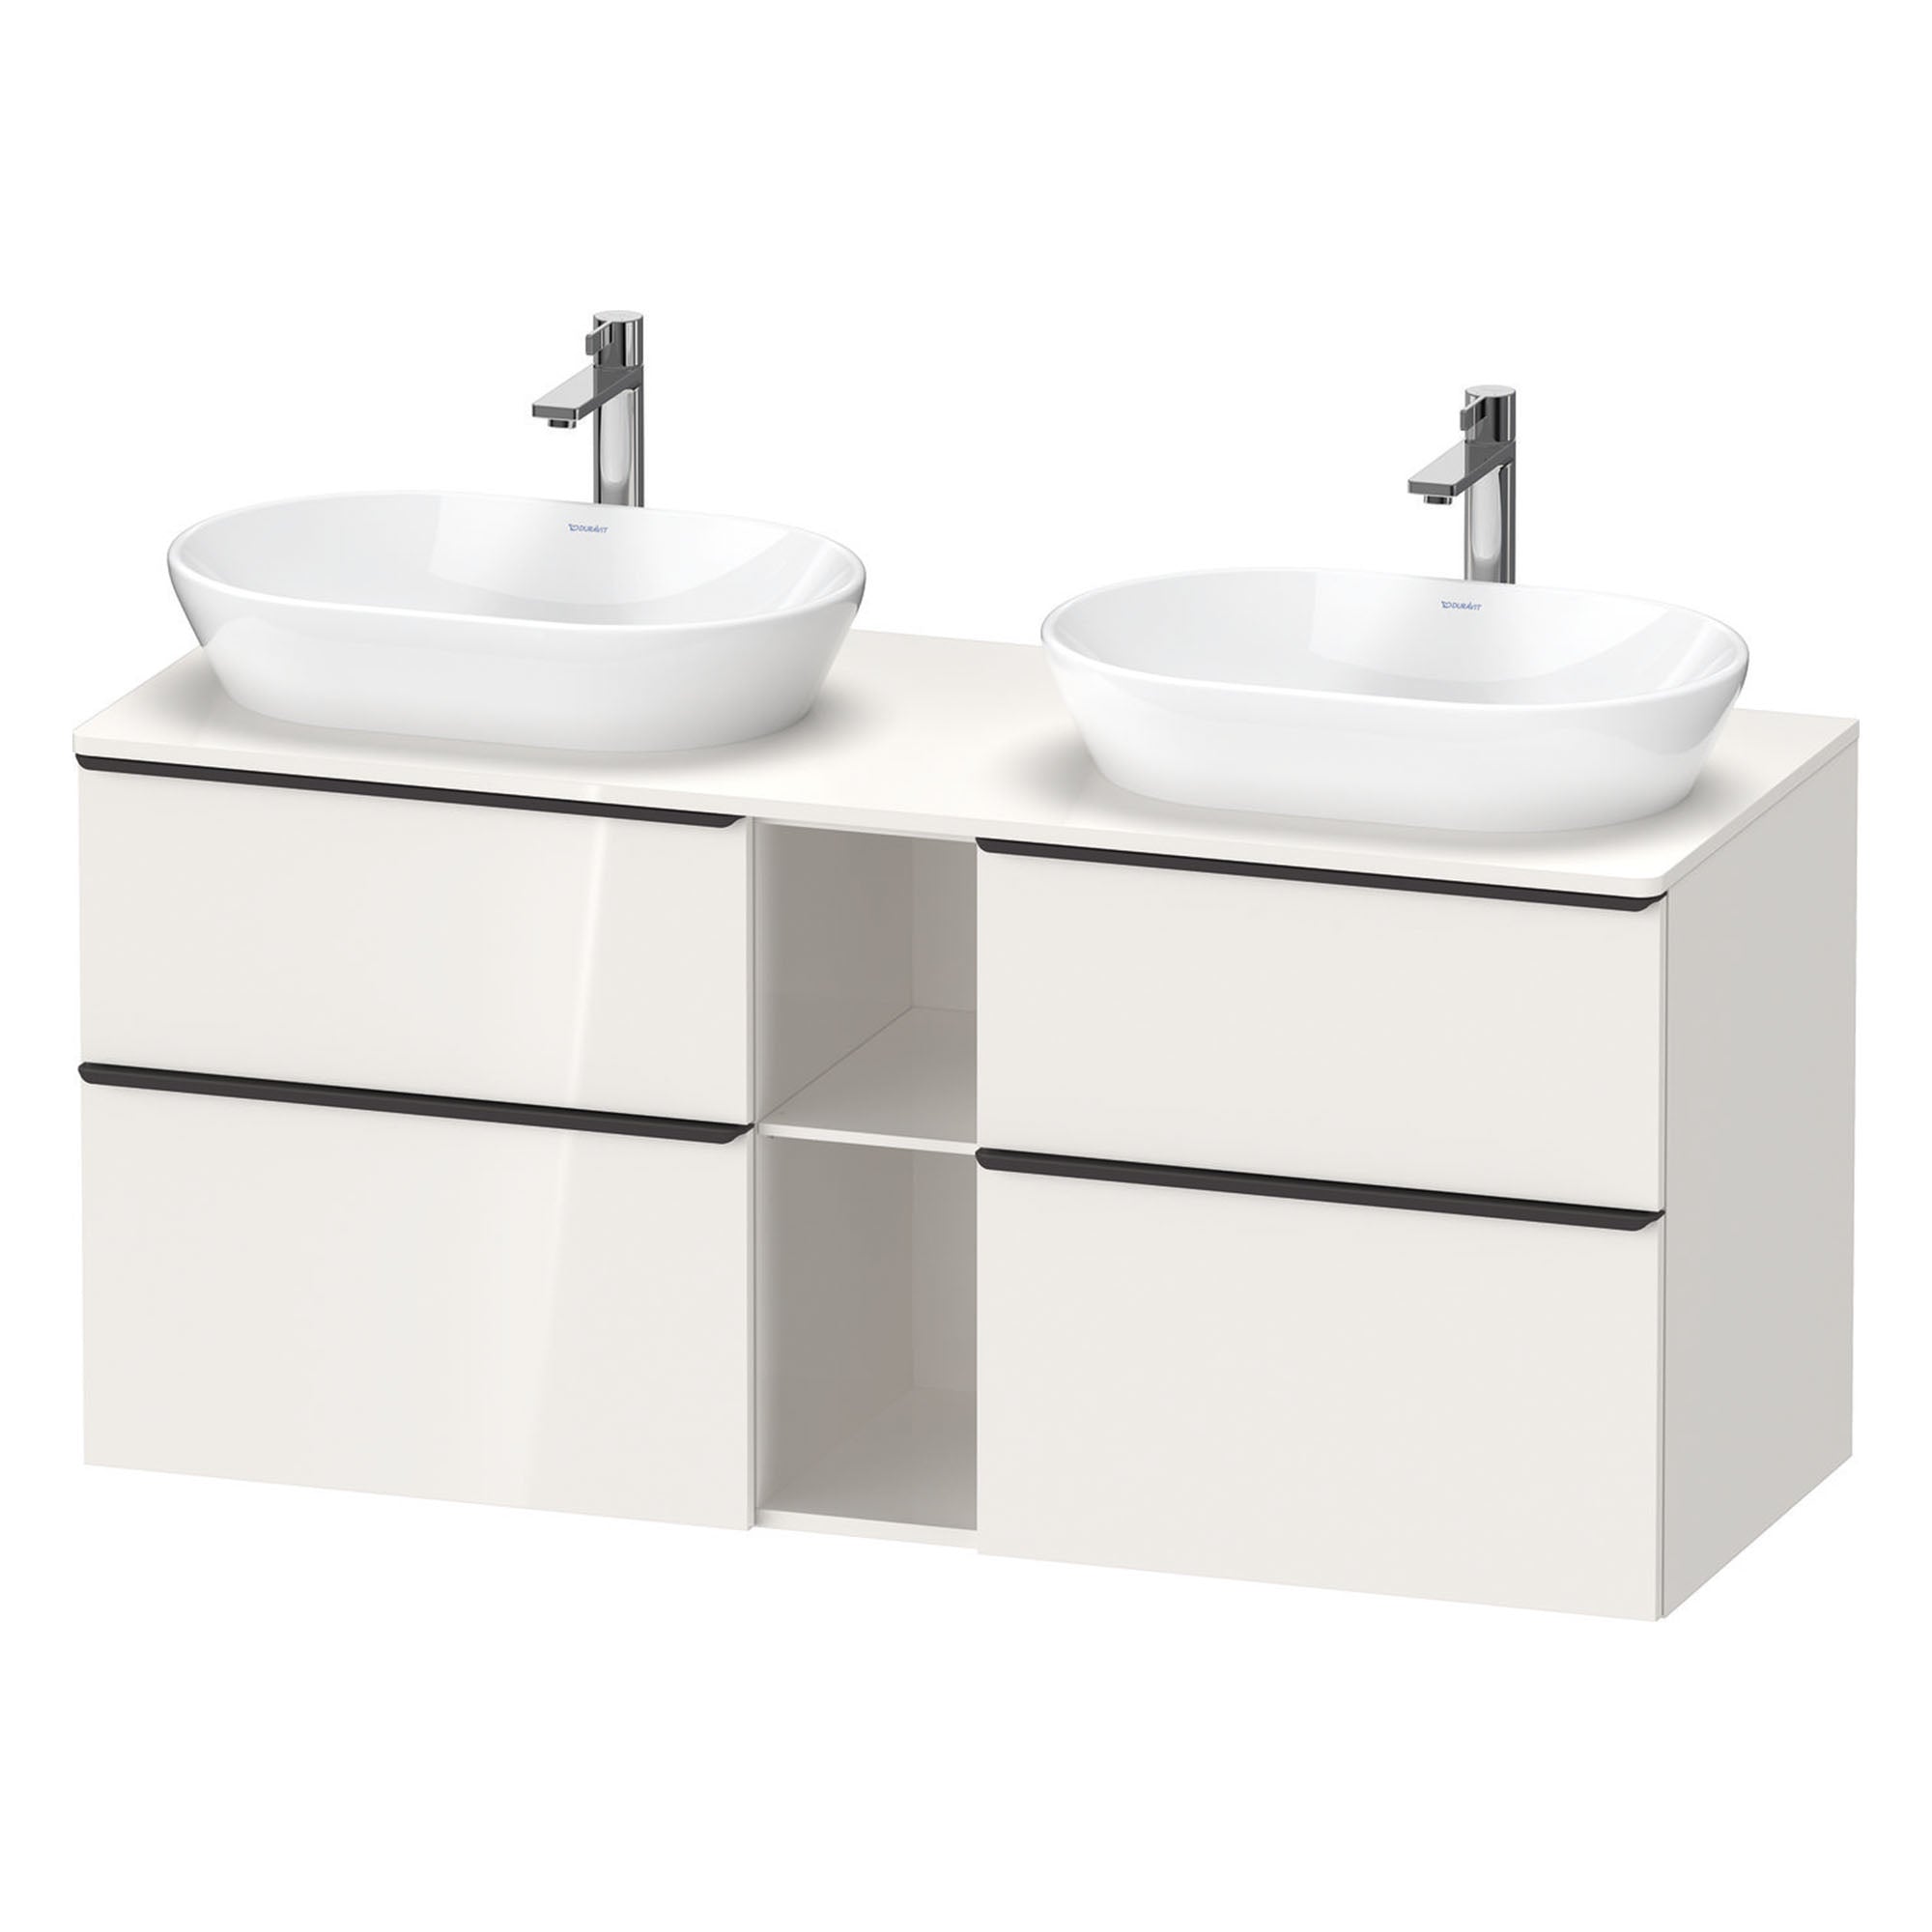 duravit d-neo 1400 wall mounted vanity unit with worktop 2 open shelves white gloss diamond black handles